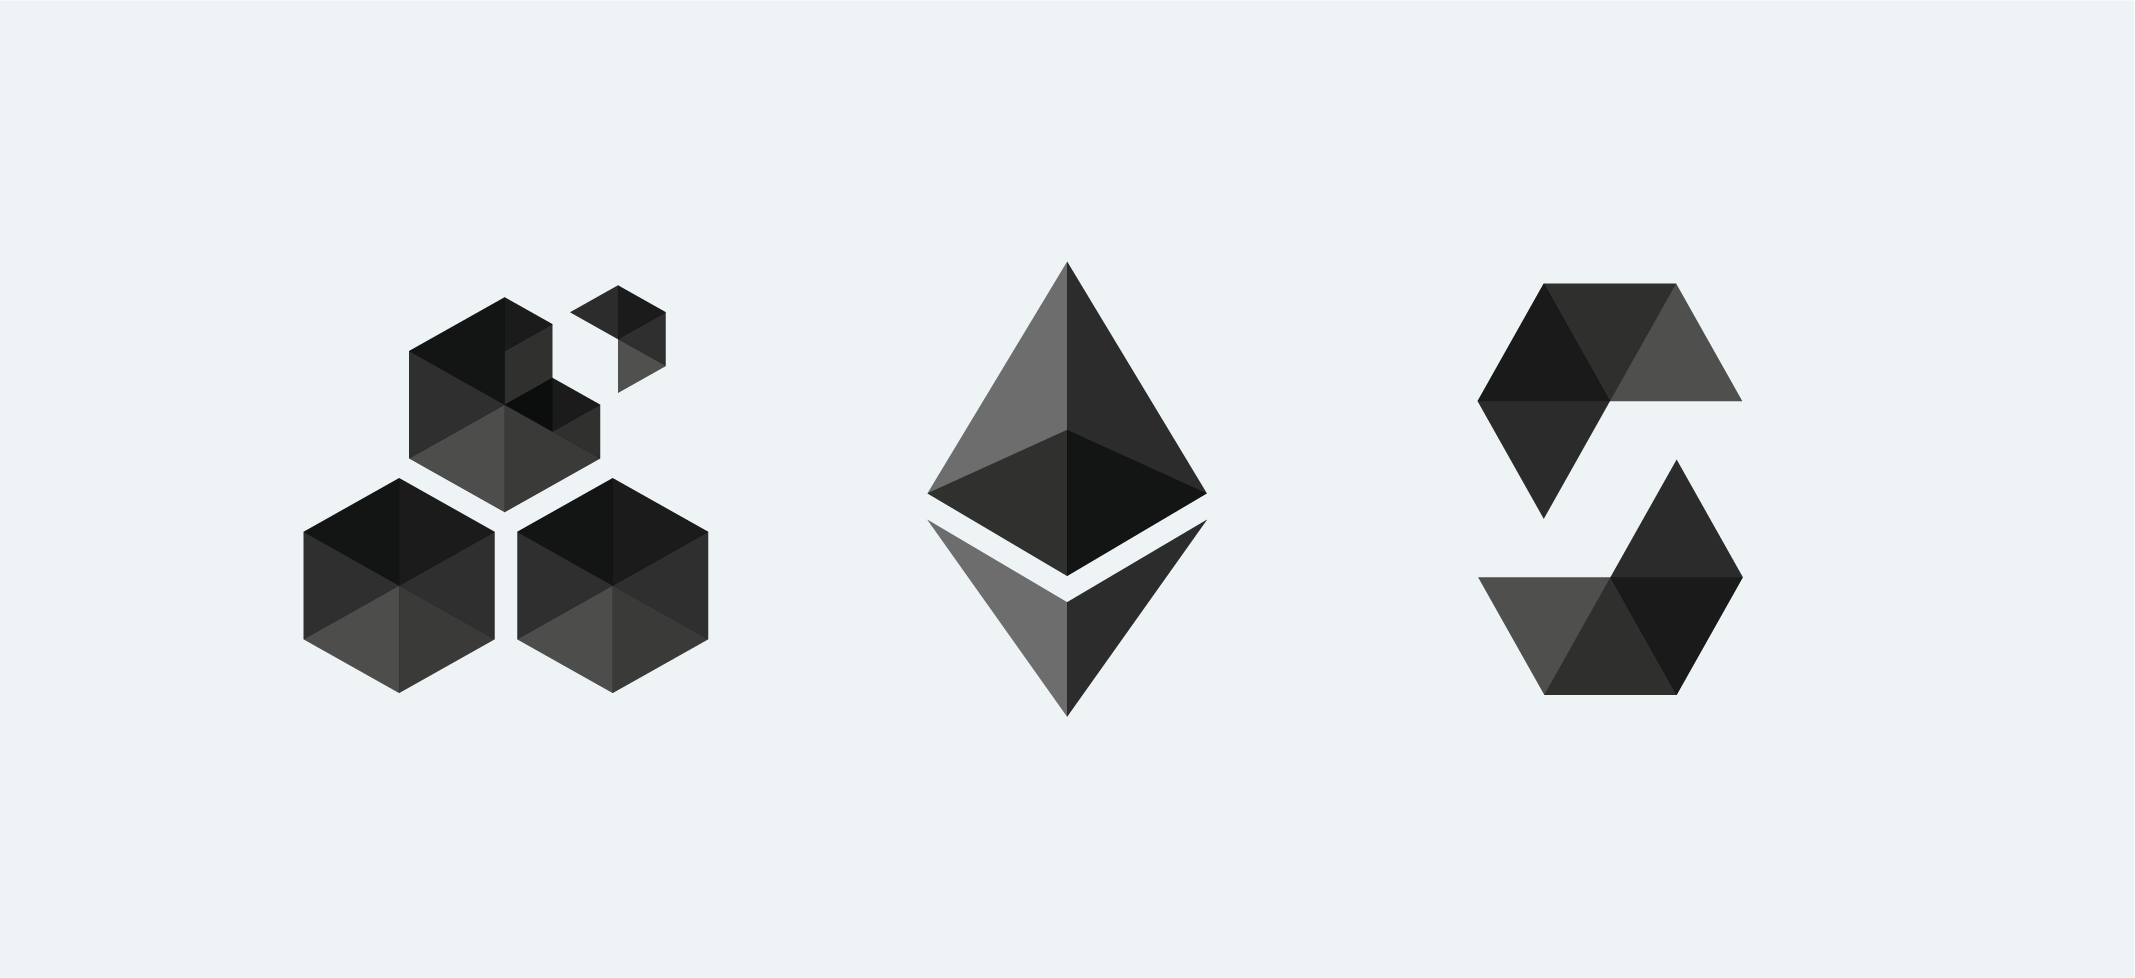 Ethereum's existing logo along with Swarm, and Solidity